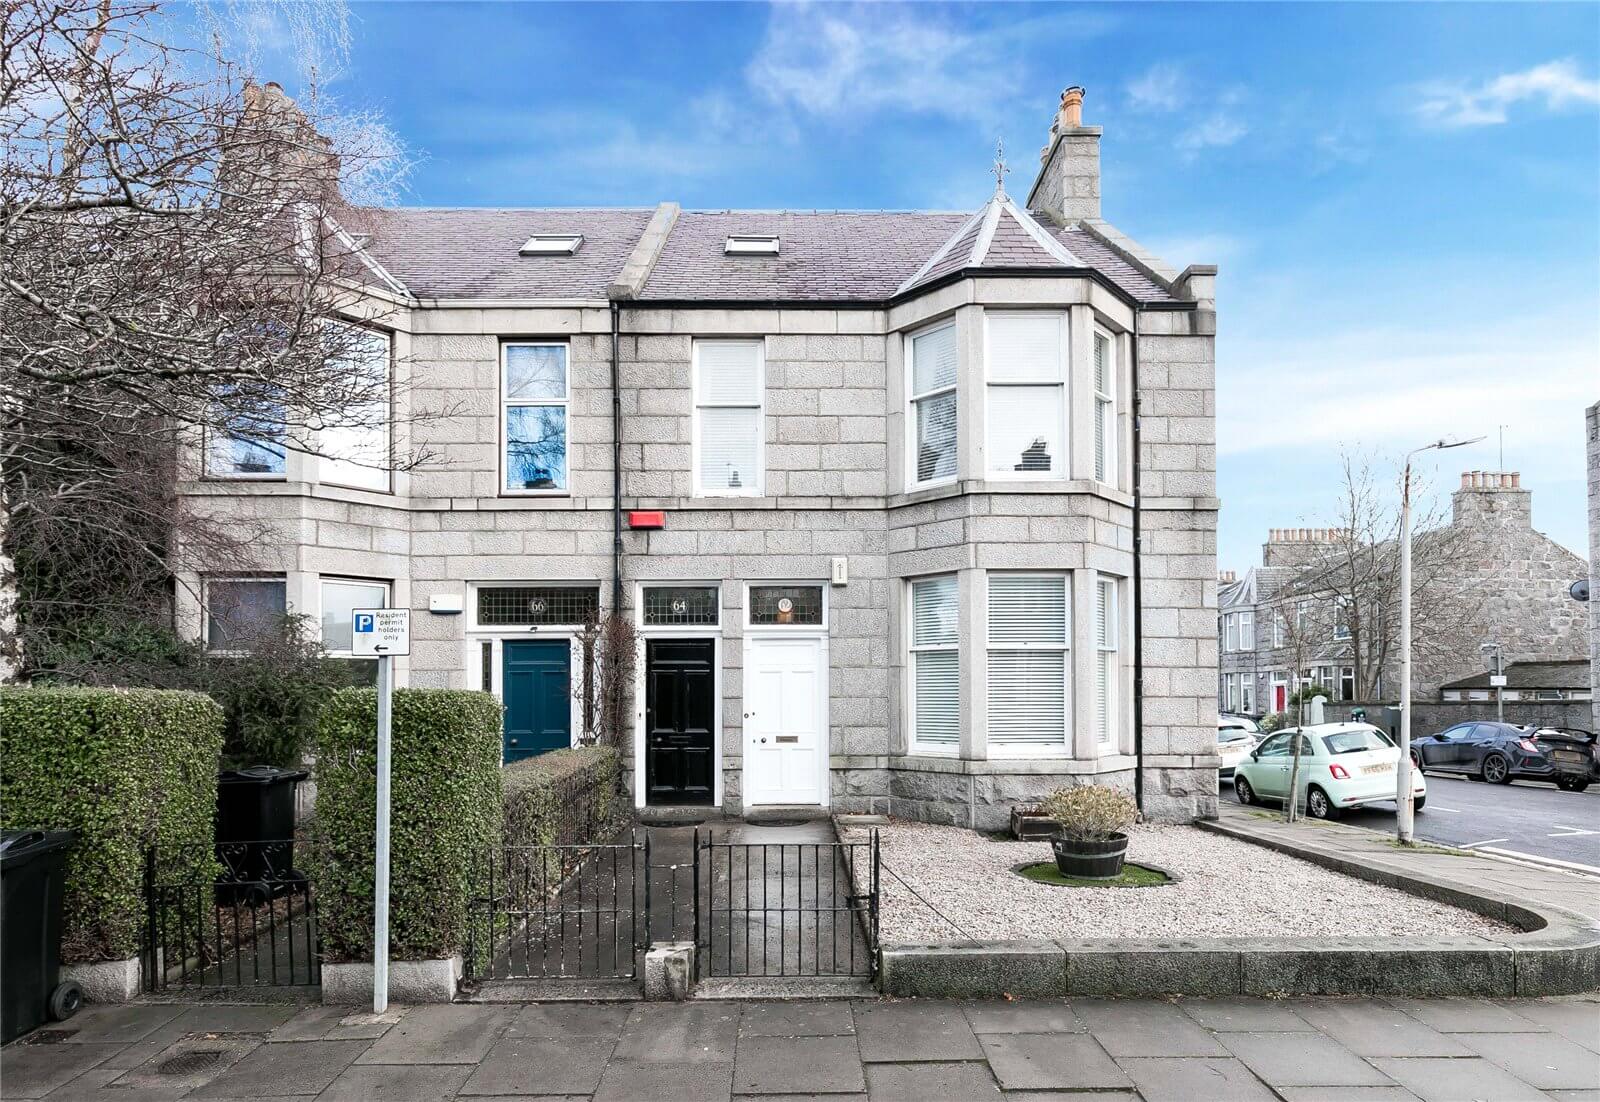 Our latest properties for sale and to let (27th February 2019)